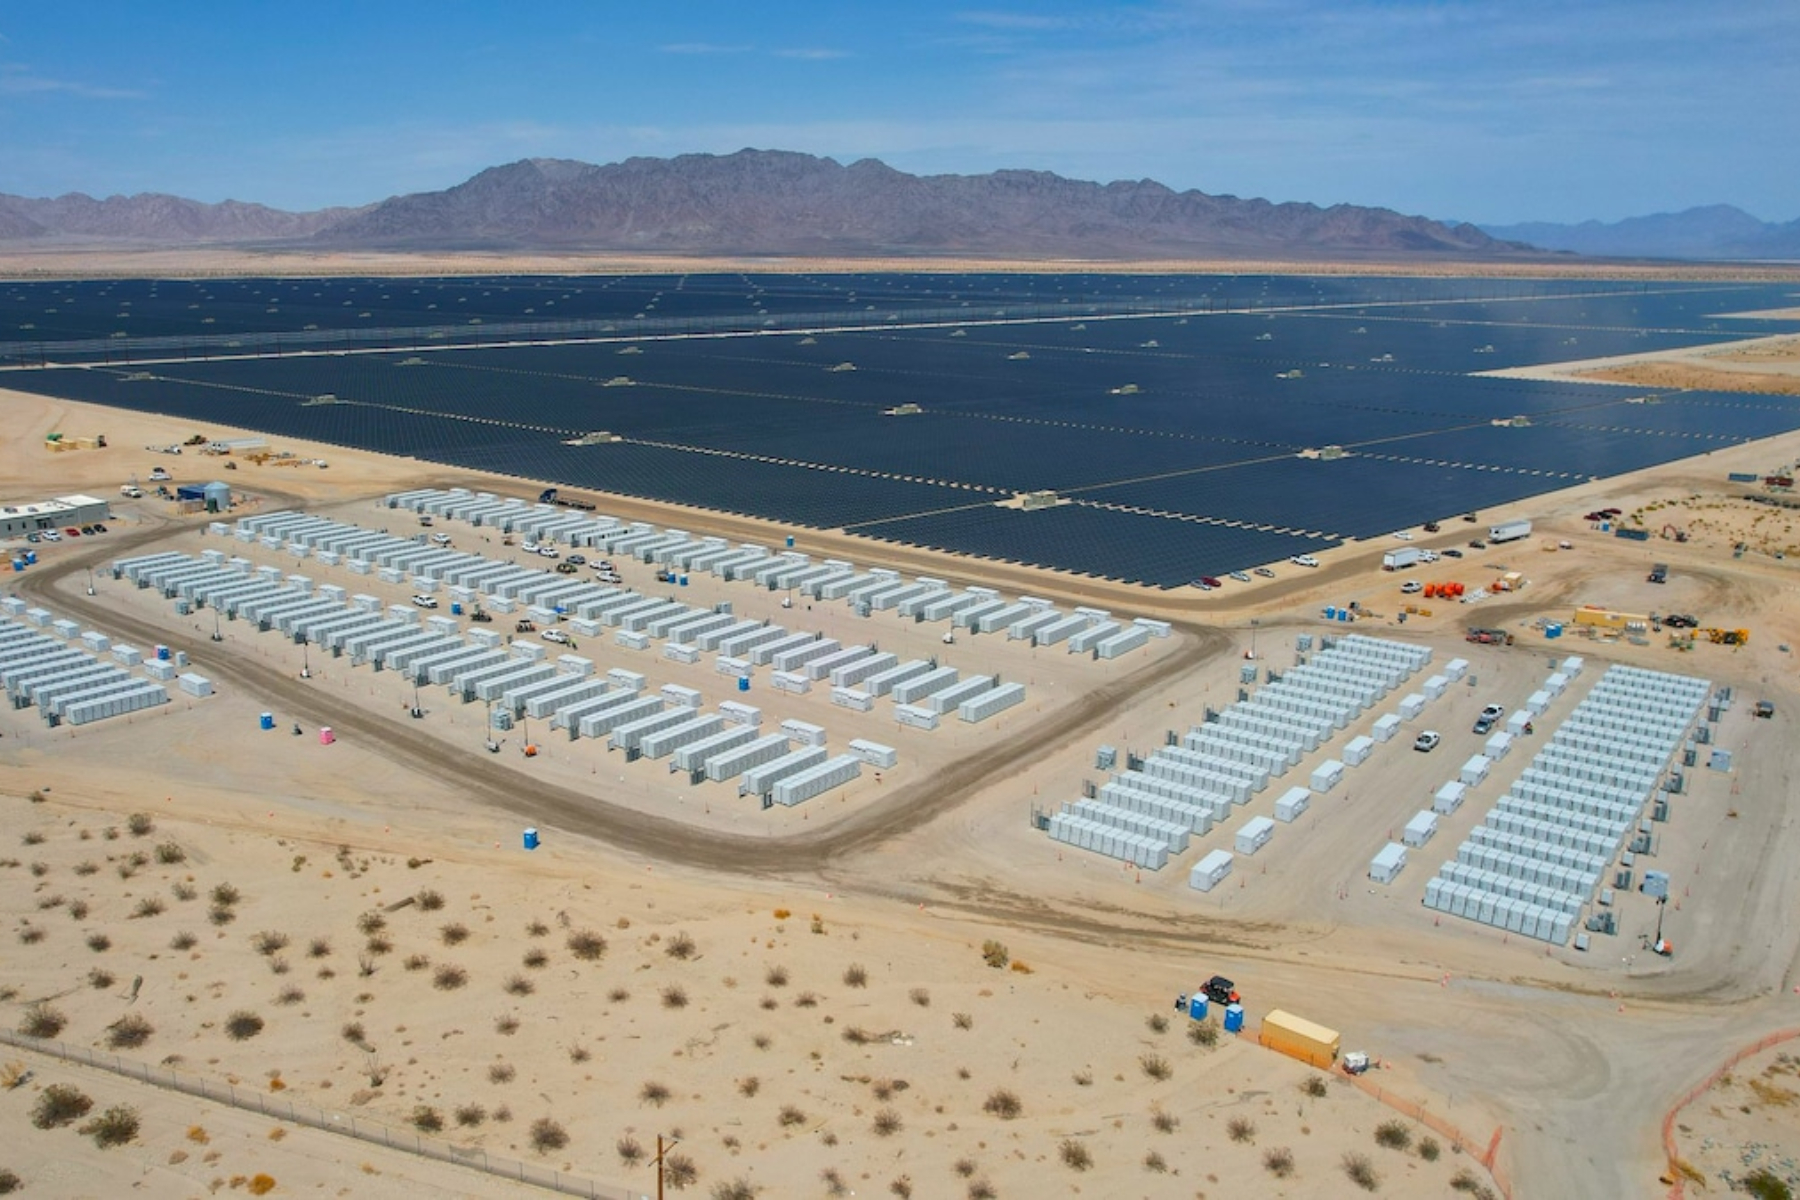 Solar Industry excited by conservation efforts, job creation by the BLM